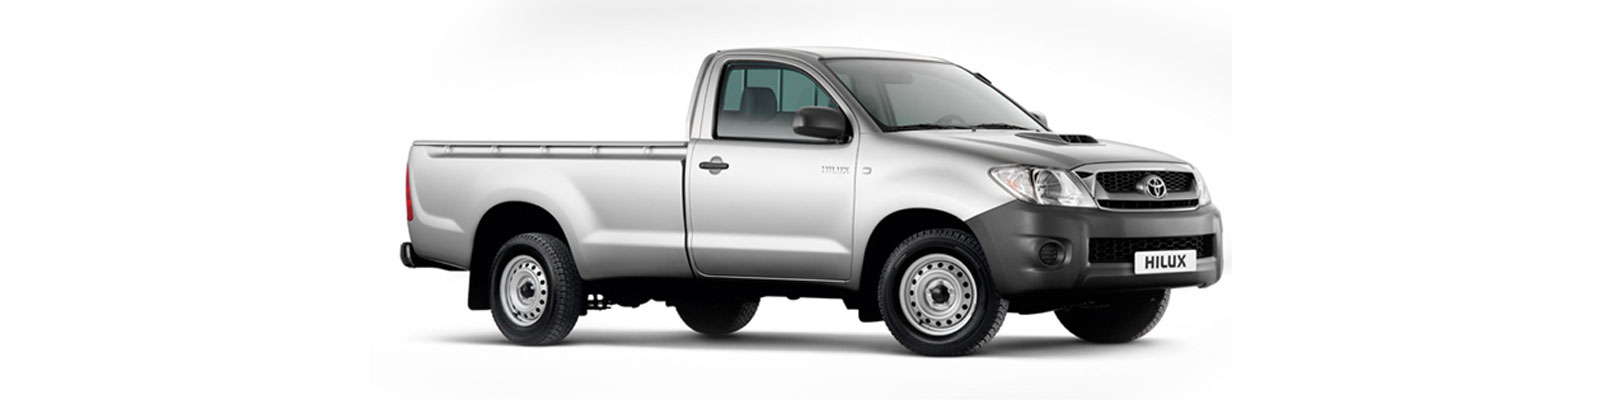 Accessories for Toyota Hilux Single Cab 2009-2011